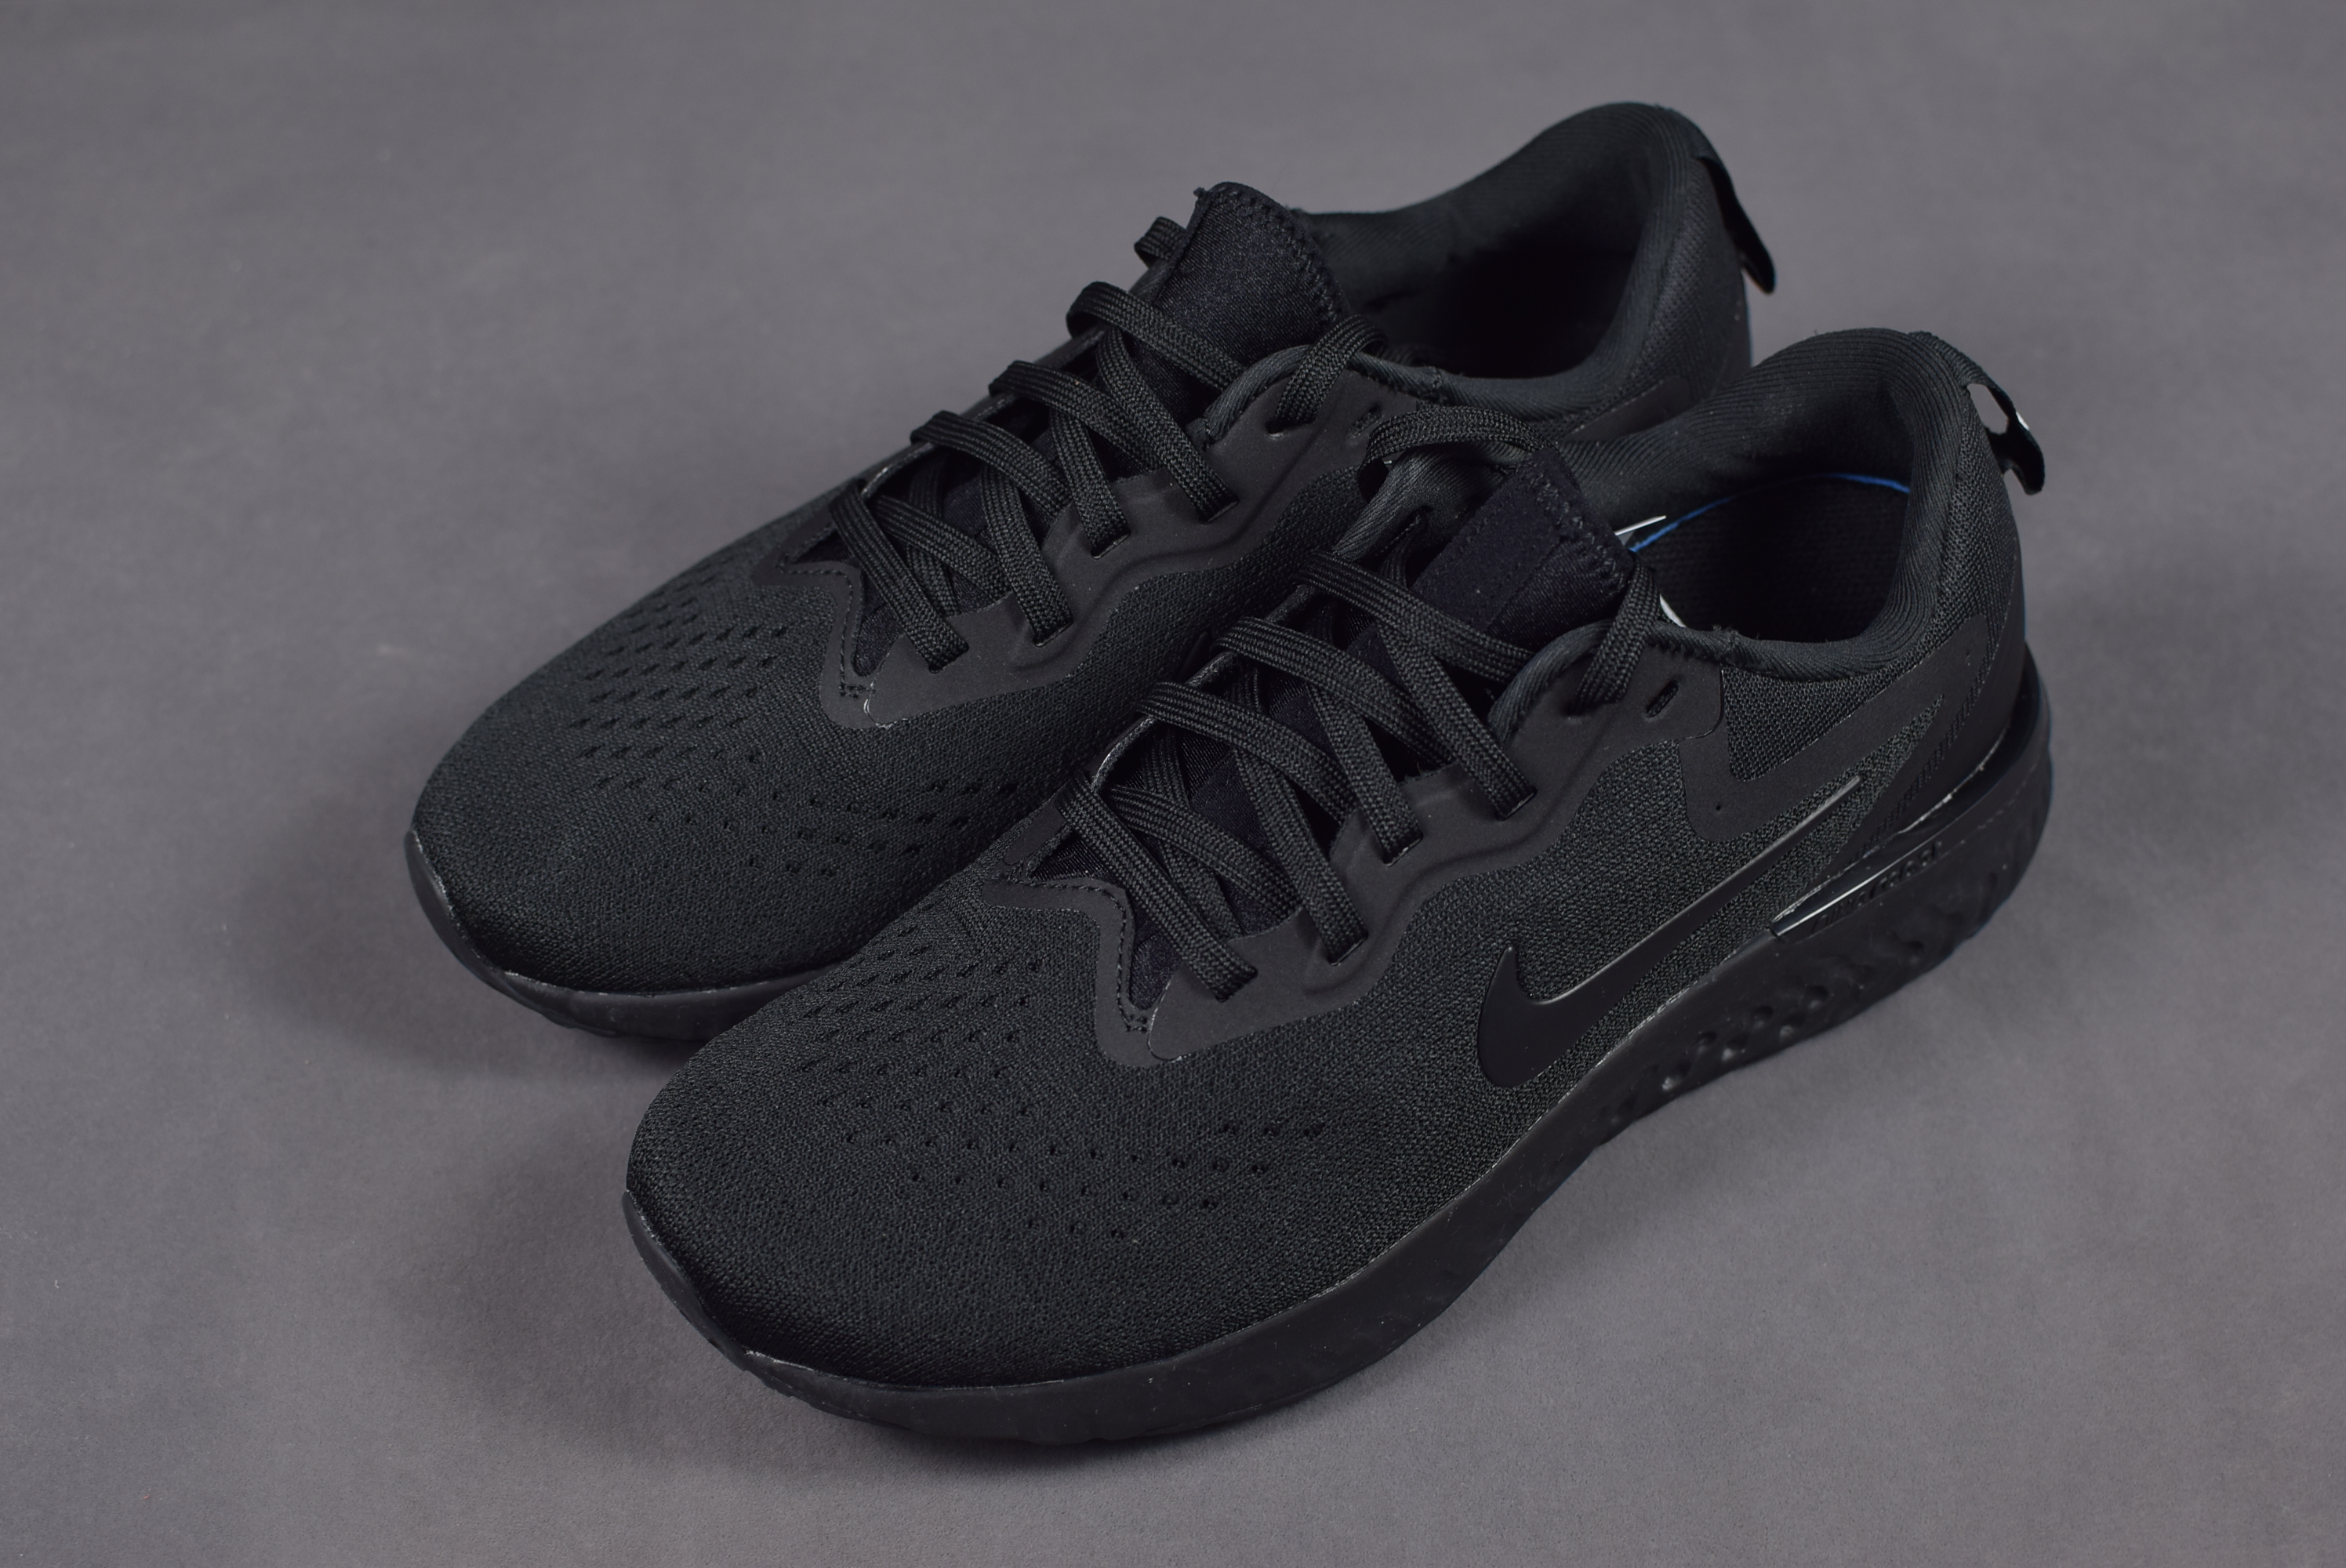 Nike Odyssey React All Black Shoes